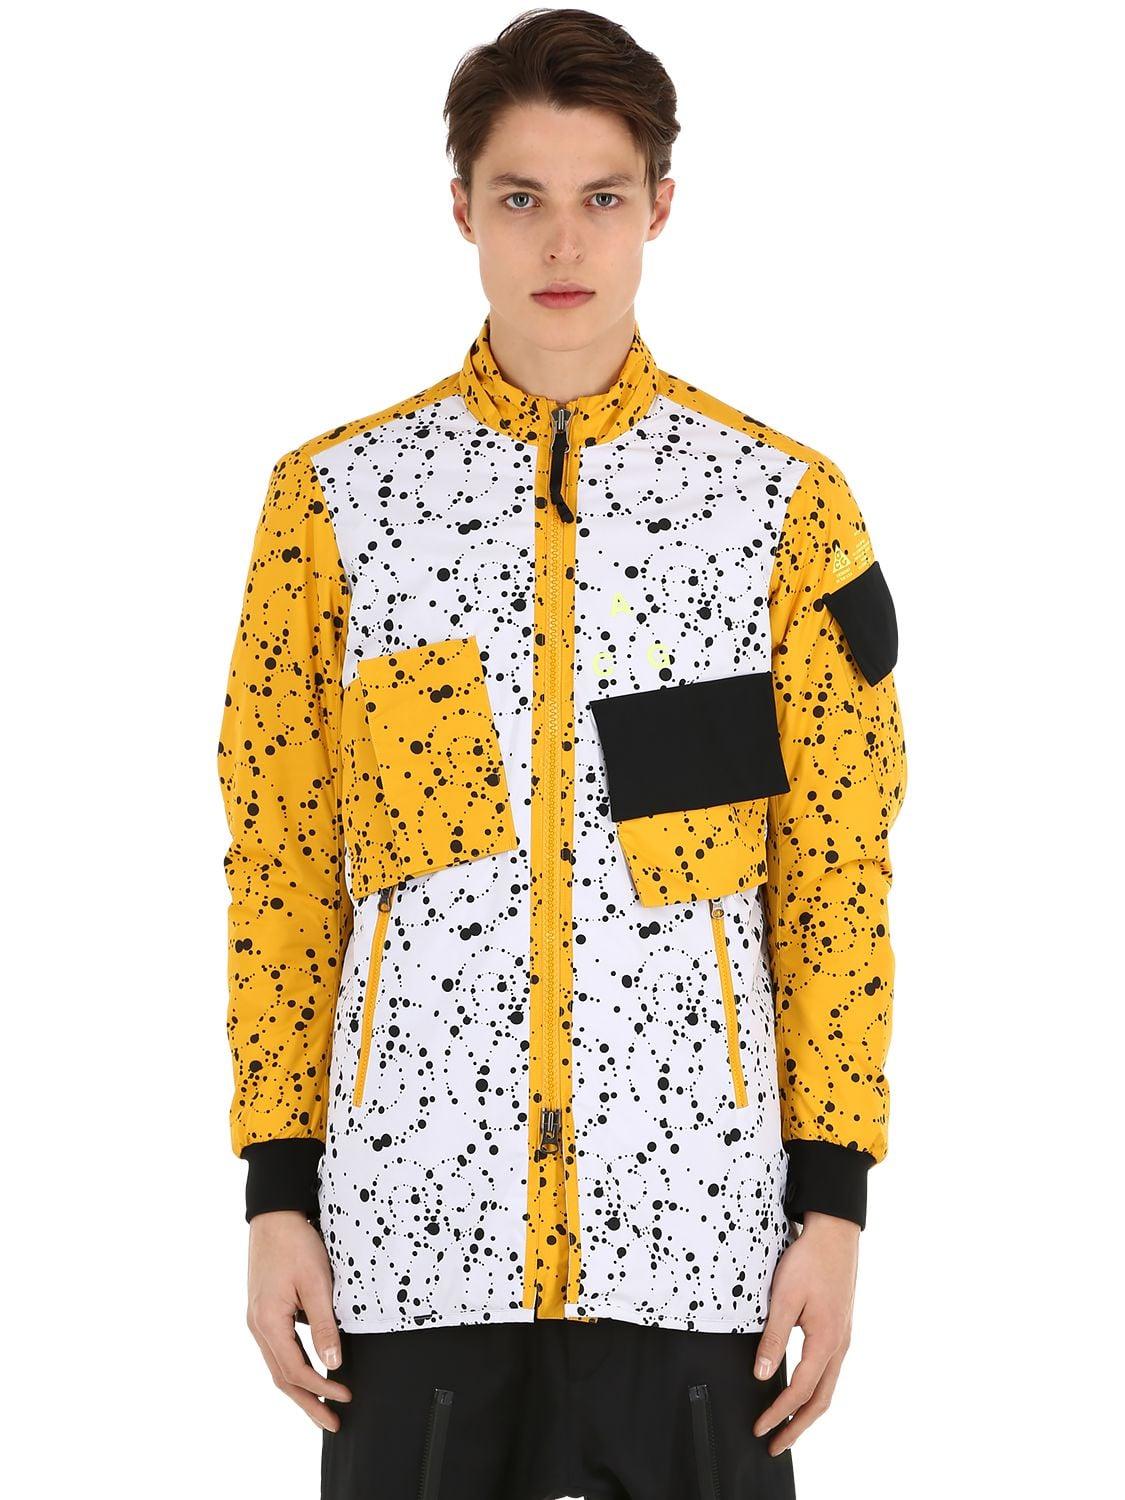 Nike Synthetic Nikelab Acg Insulated Ripstop Jacket in White/Yellow  (Yellow) for Men - Lyst